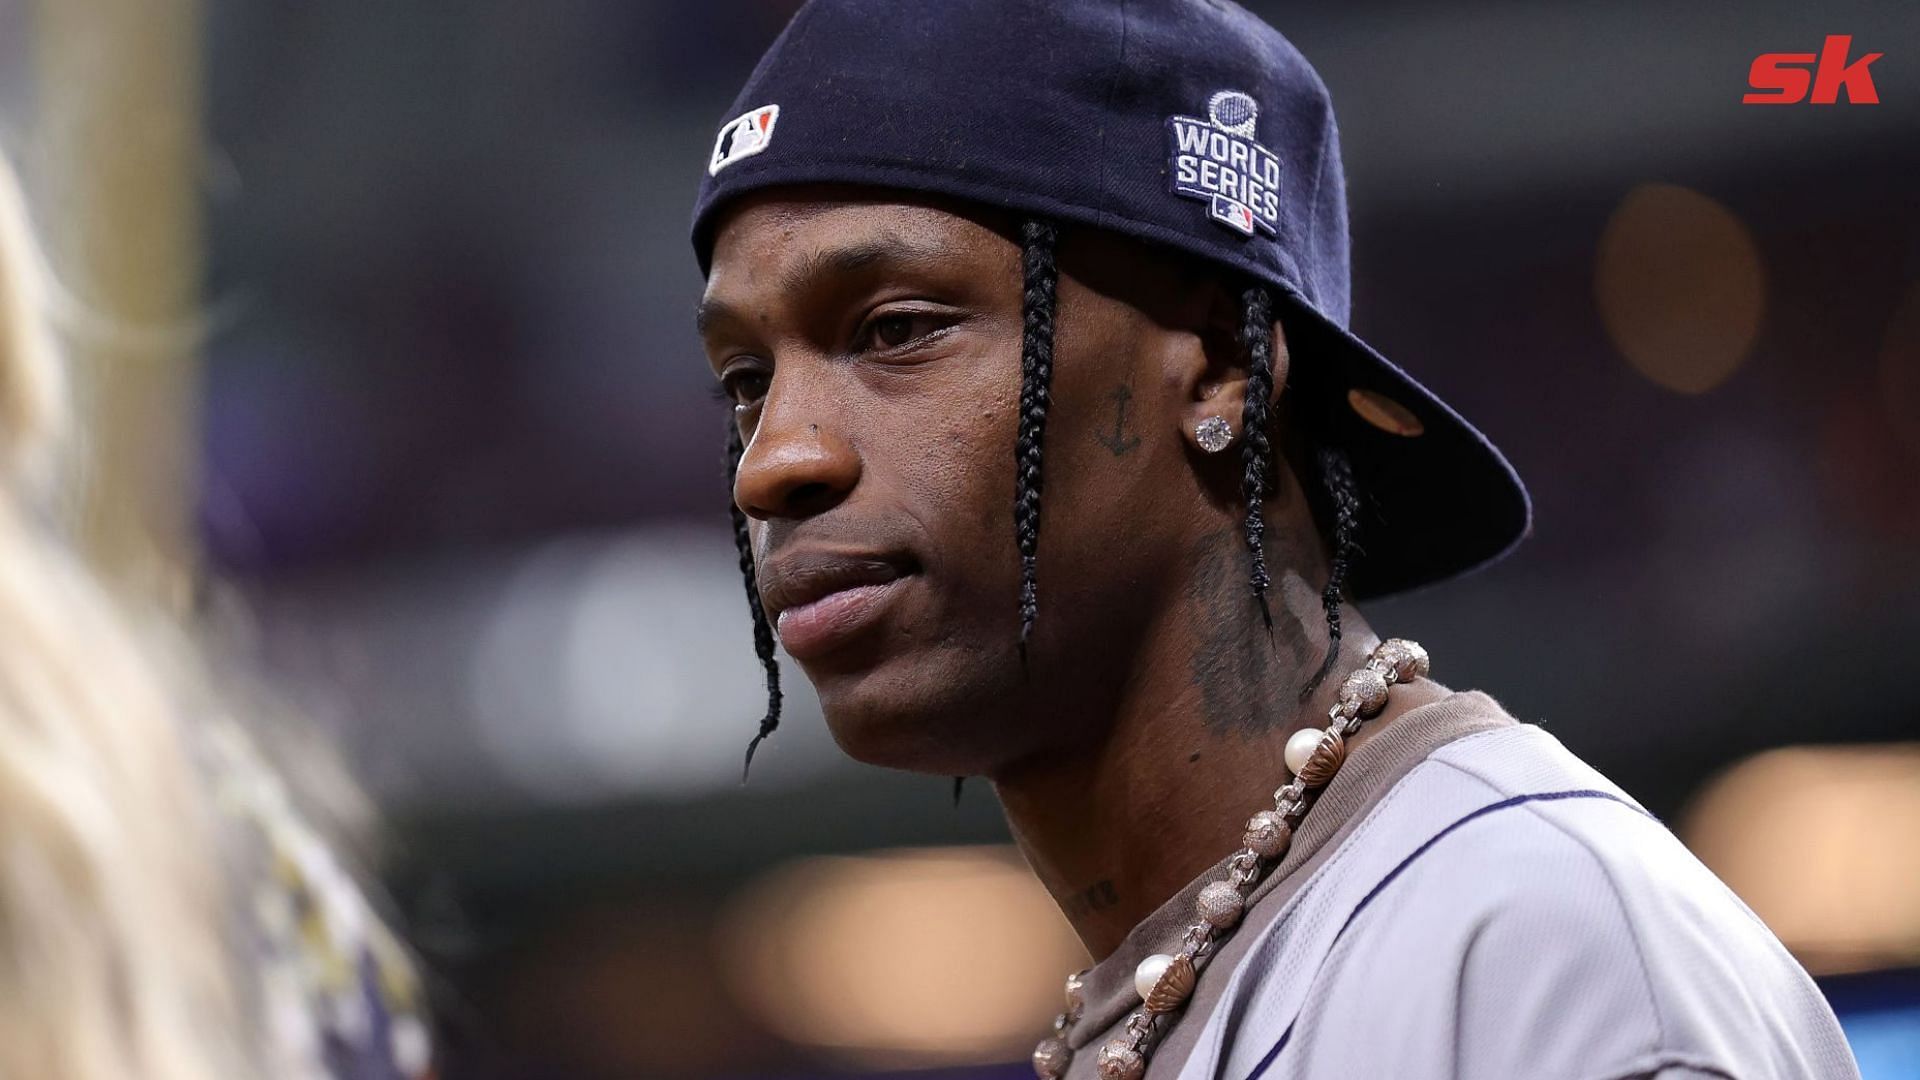 MLB fans clown Travis Scott after rapper plays new album exclusively for team